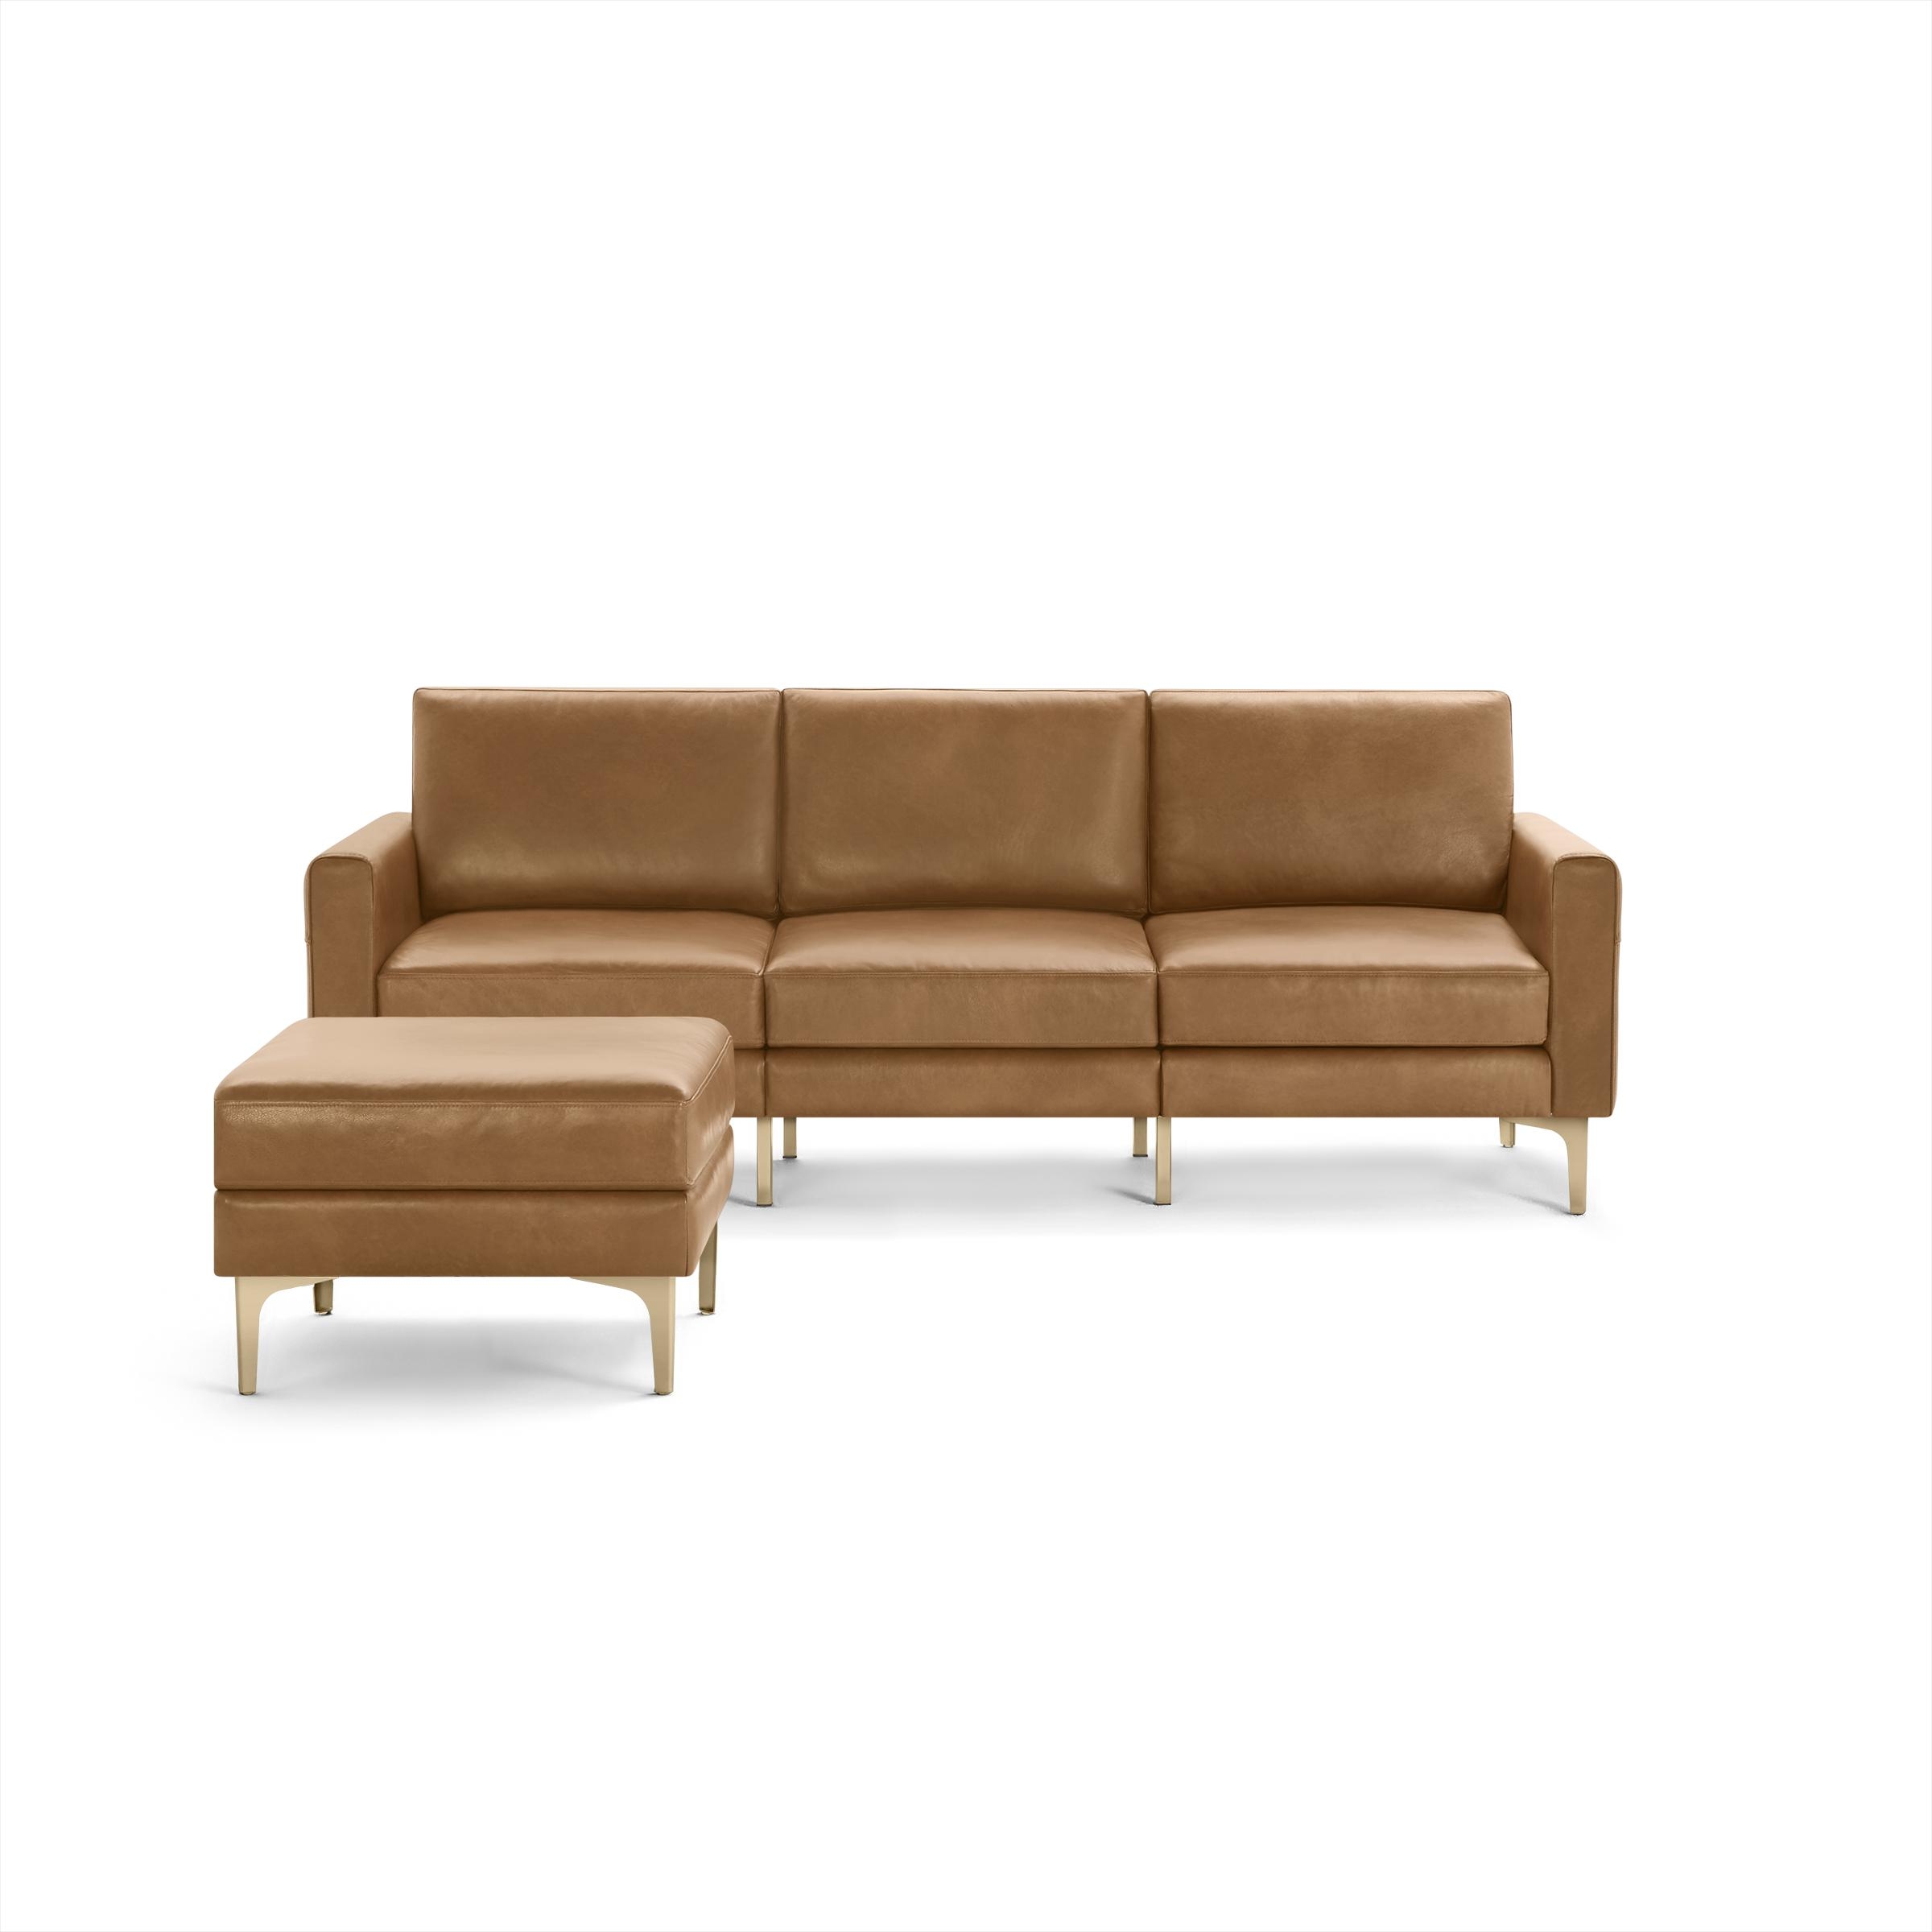 Nomad Leather Sofa and Ottoman in Camel - Image 0